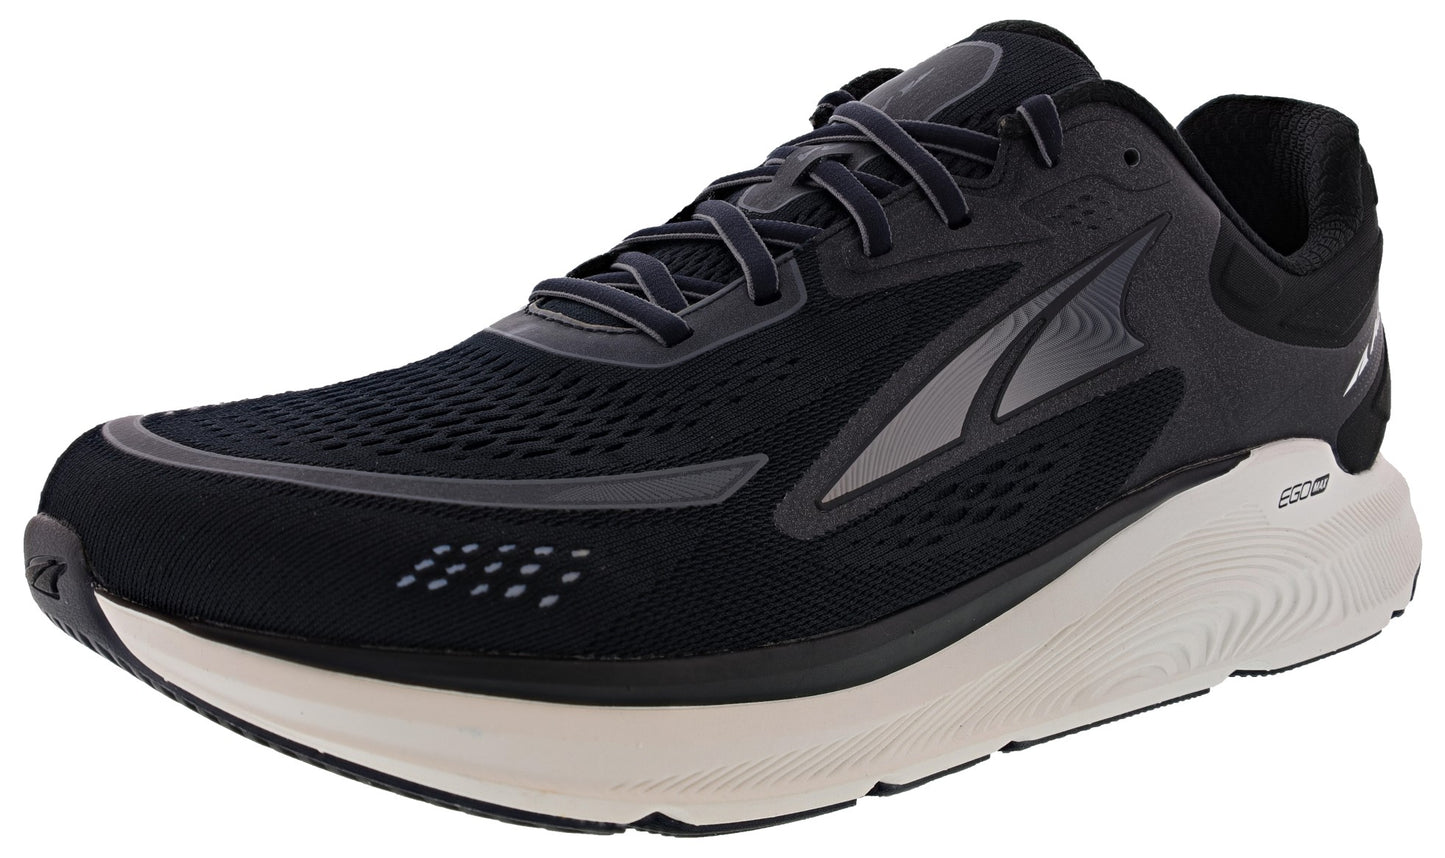 Lateral of Black Altra Men’s Paradigm 6 Trainer Running Shoes